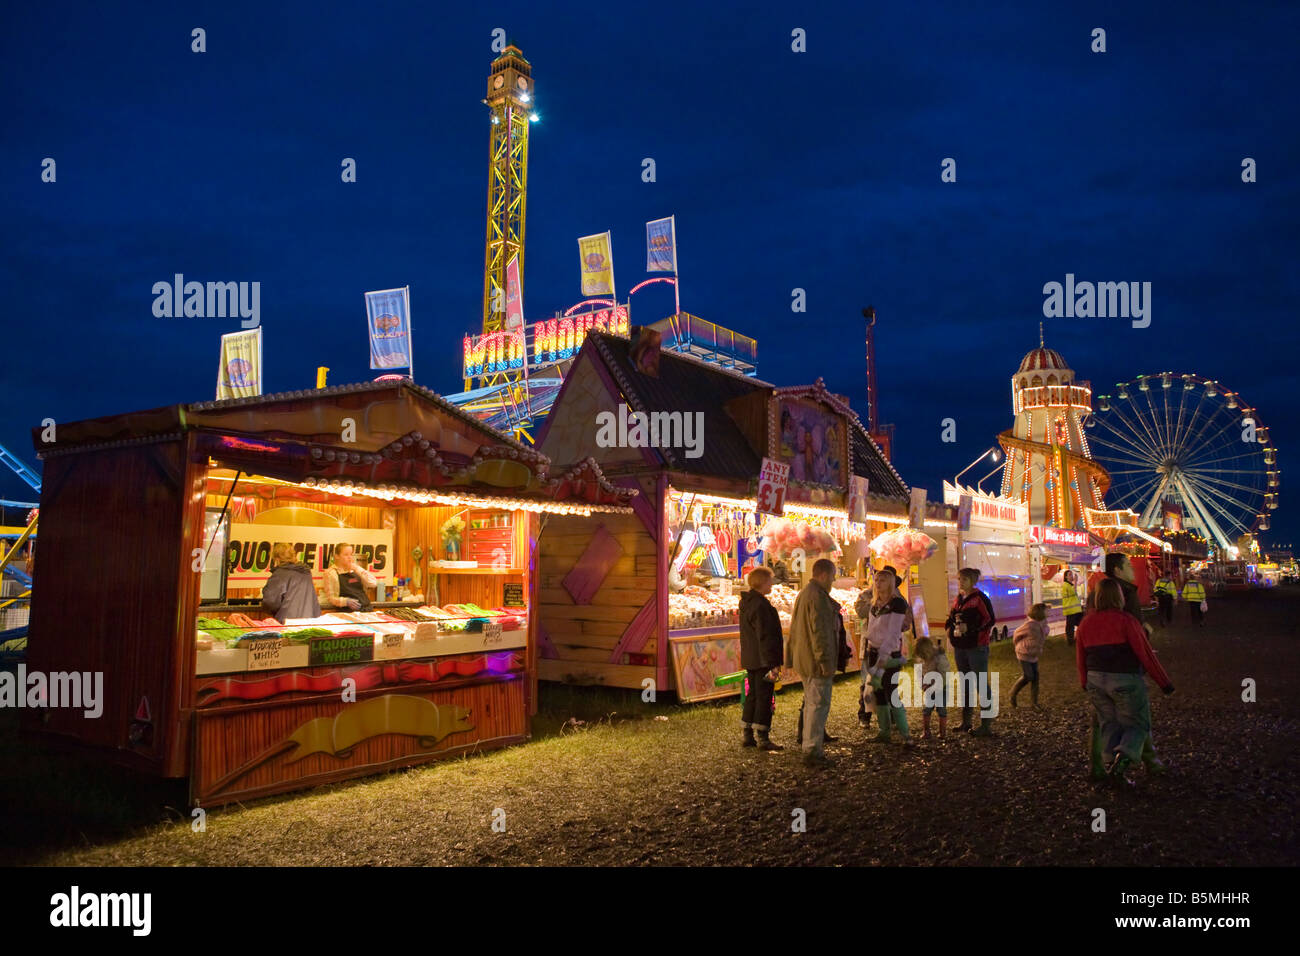 Food and prize stalls at a funfair (specifically 'The Hoppings' annual fair on Newcastle Town Moor) Stock Photo